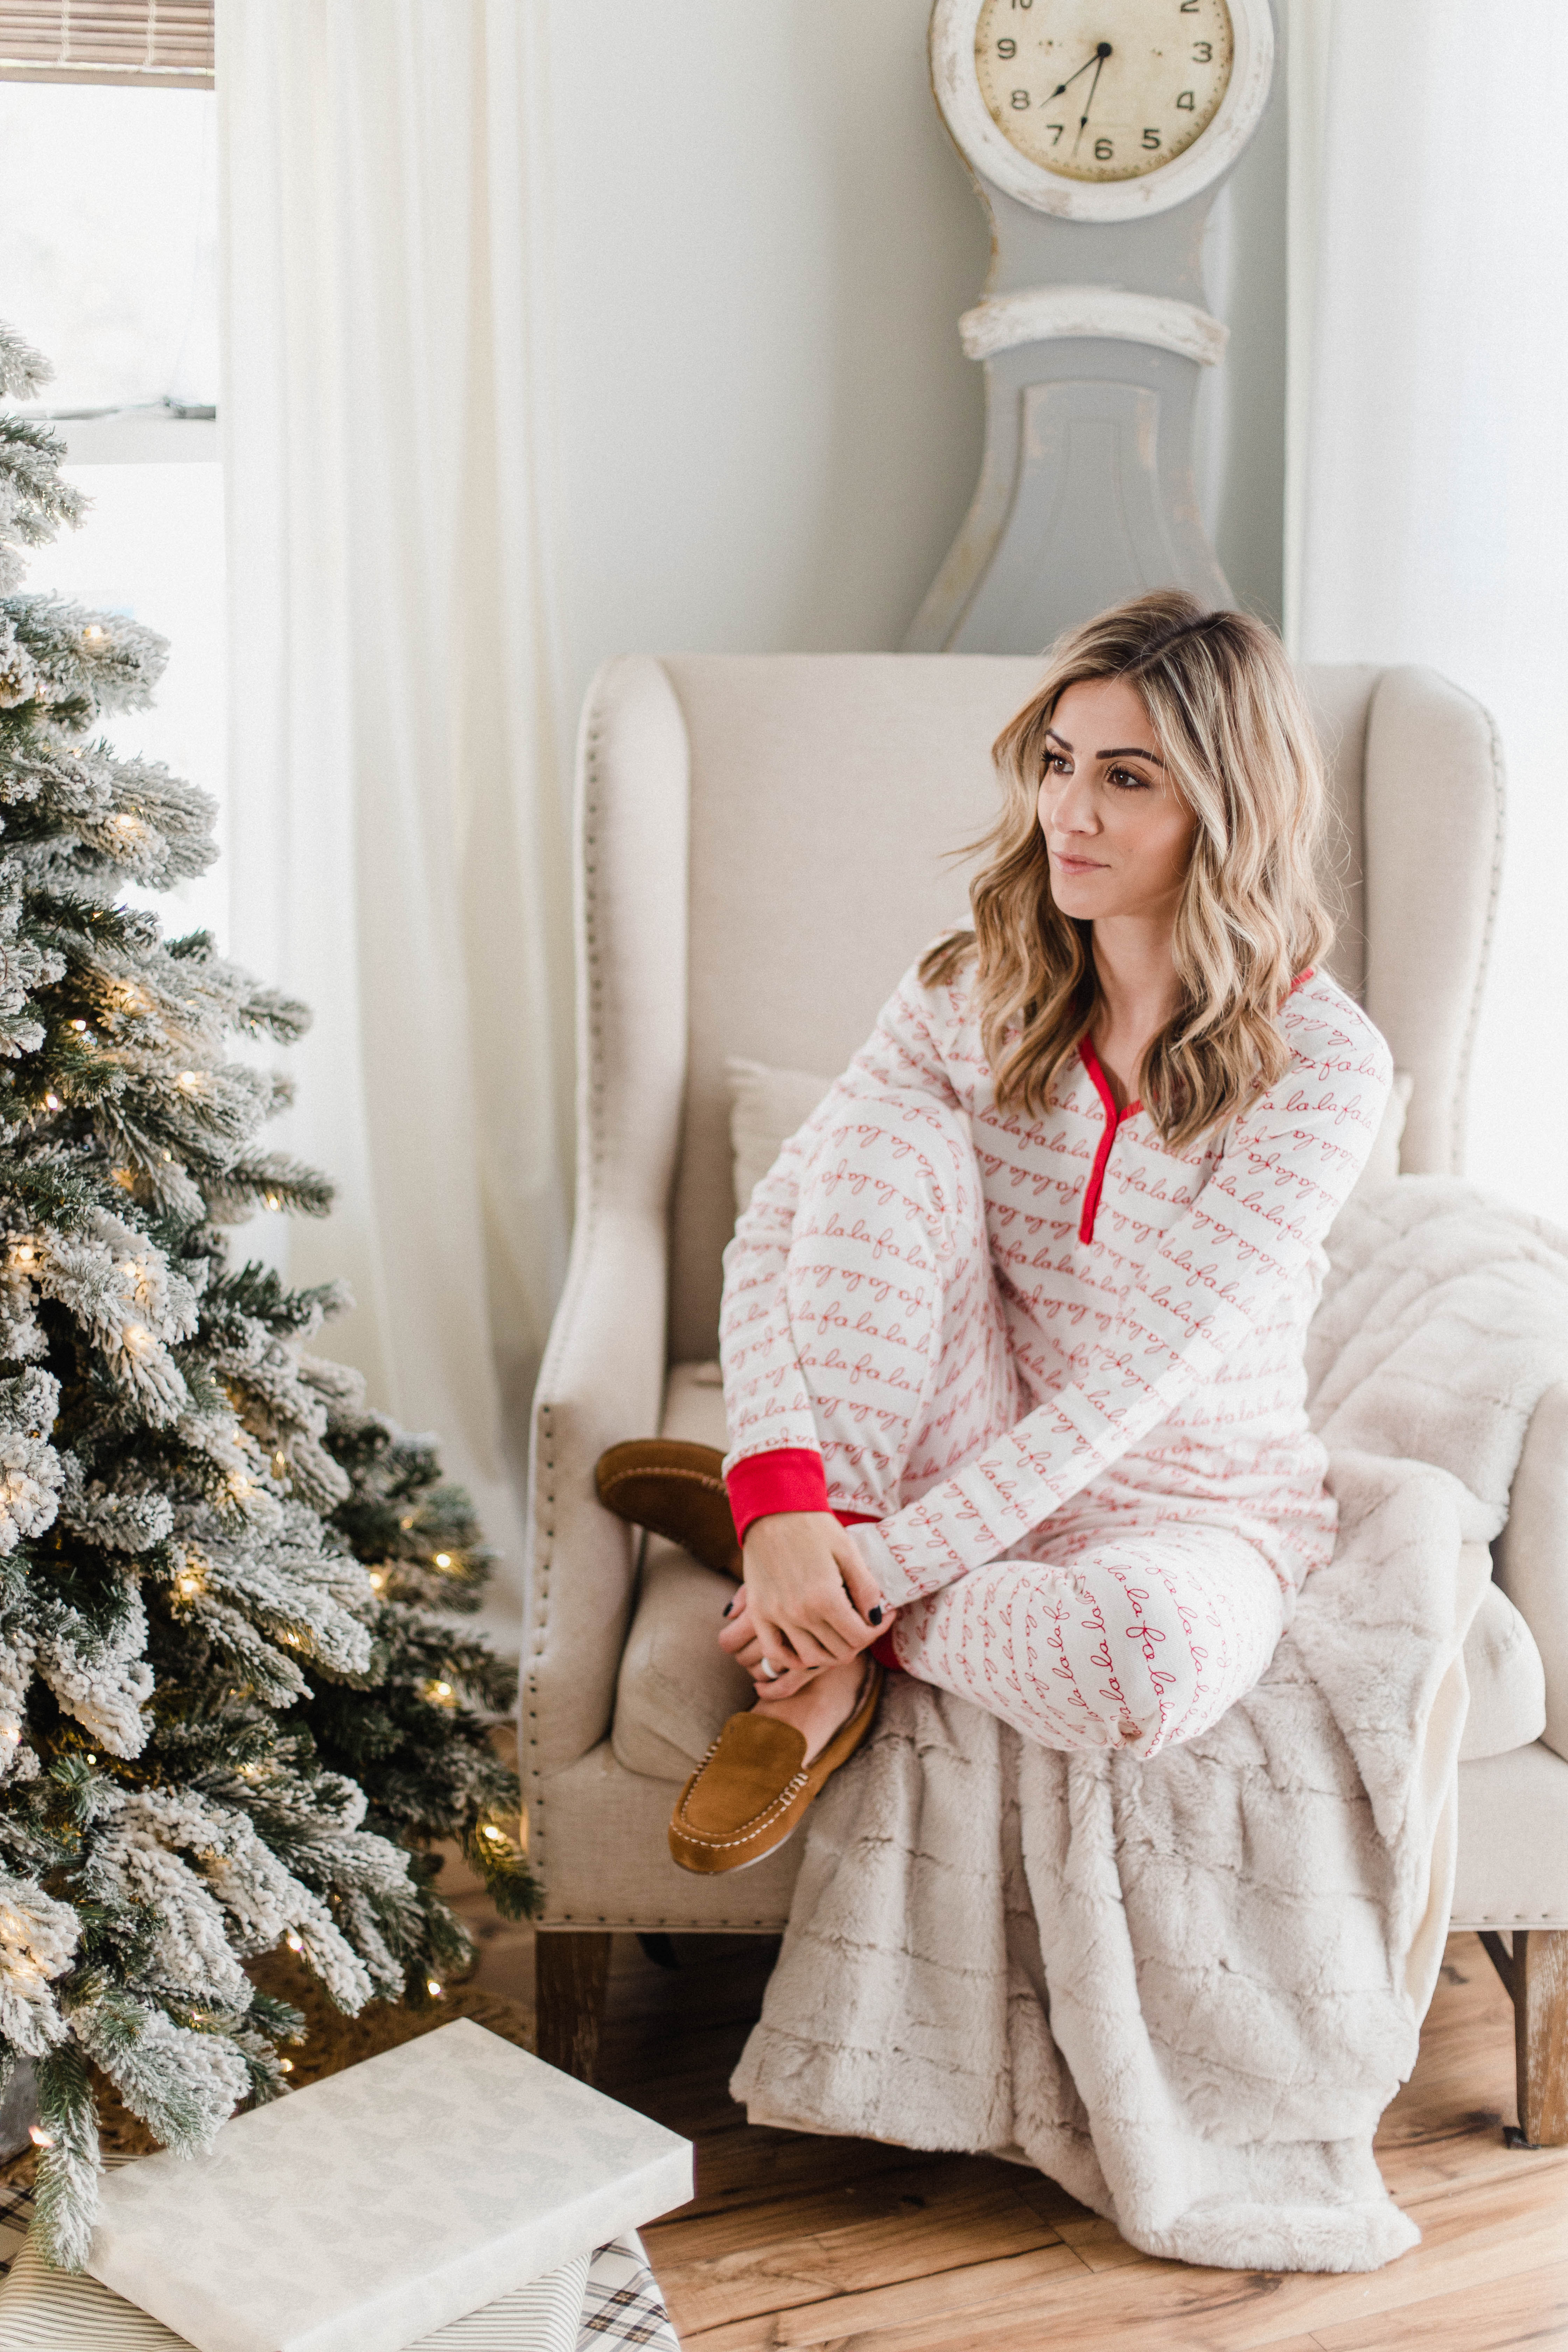 Connecticut life and style blogger Lauren McBride shares a holiday gift guide featuring gifts for everyone available at Kohl's.